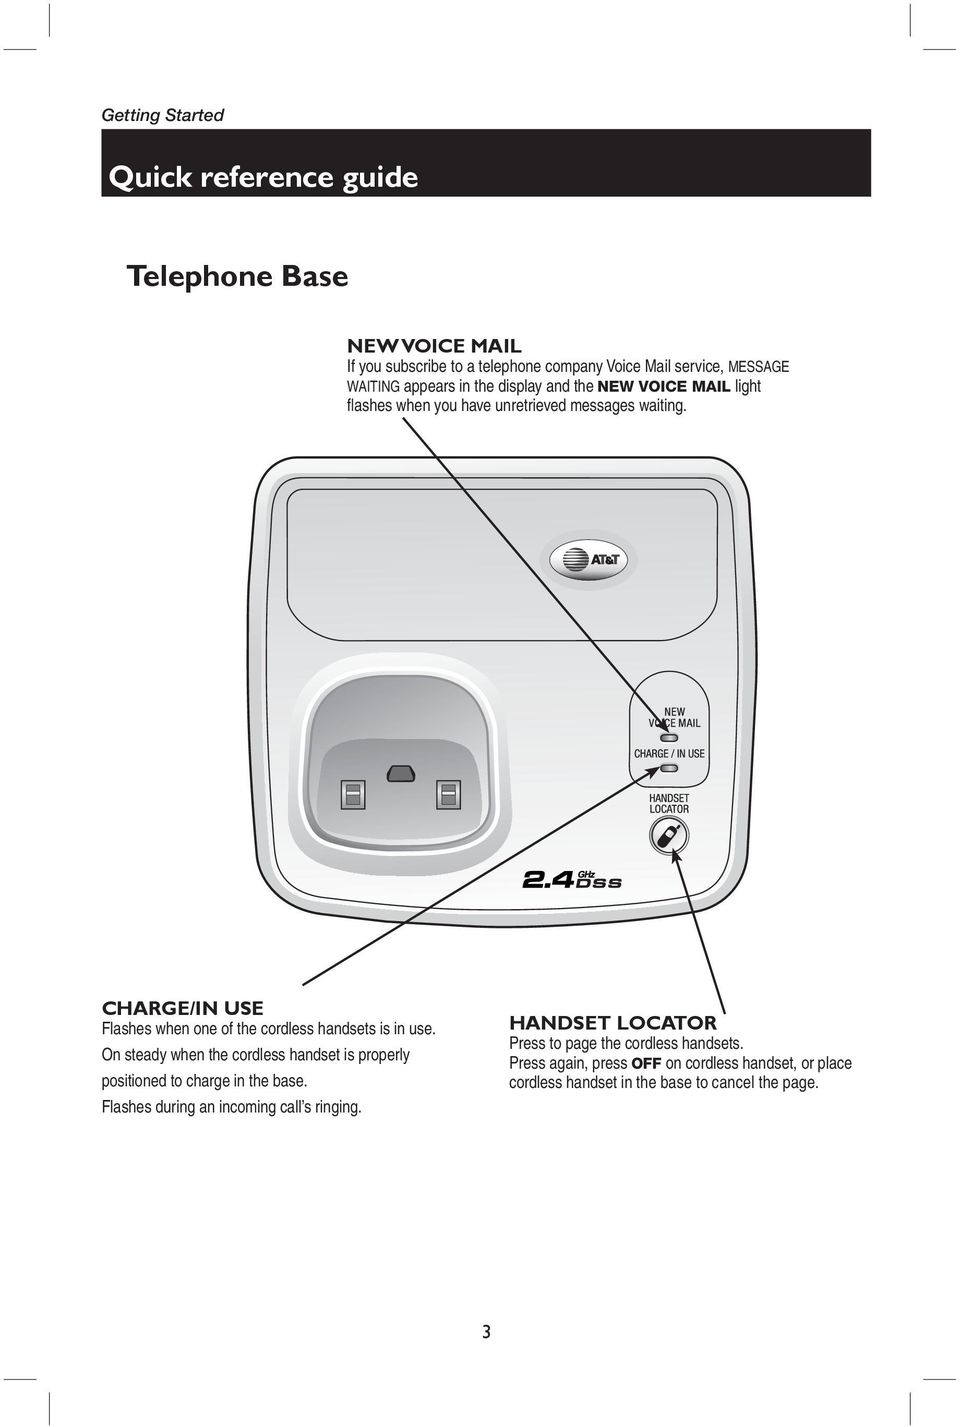 CHARGE/IN USE Flashes when one of the cordless handsets is in use. On steady when the cordless handset is properly positioned to charge in the base.